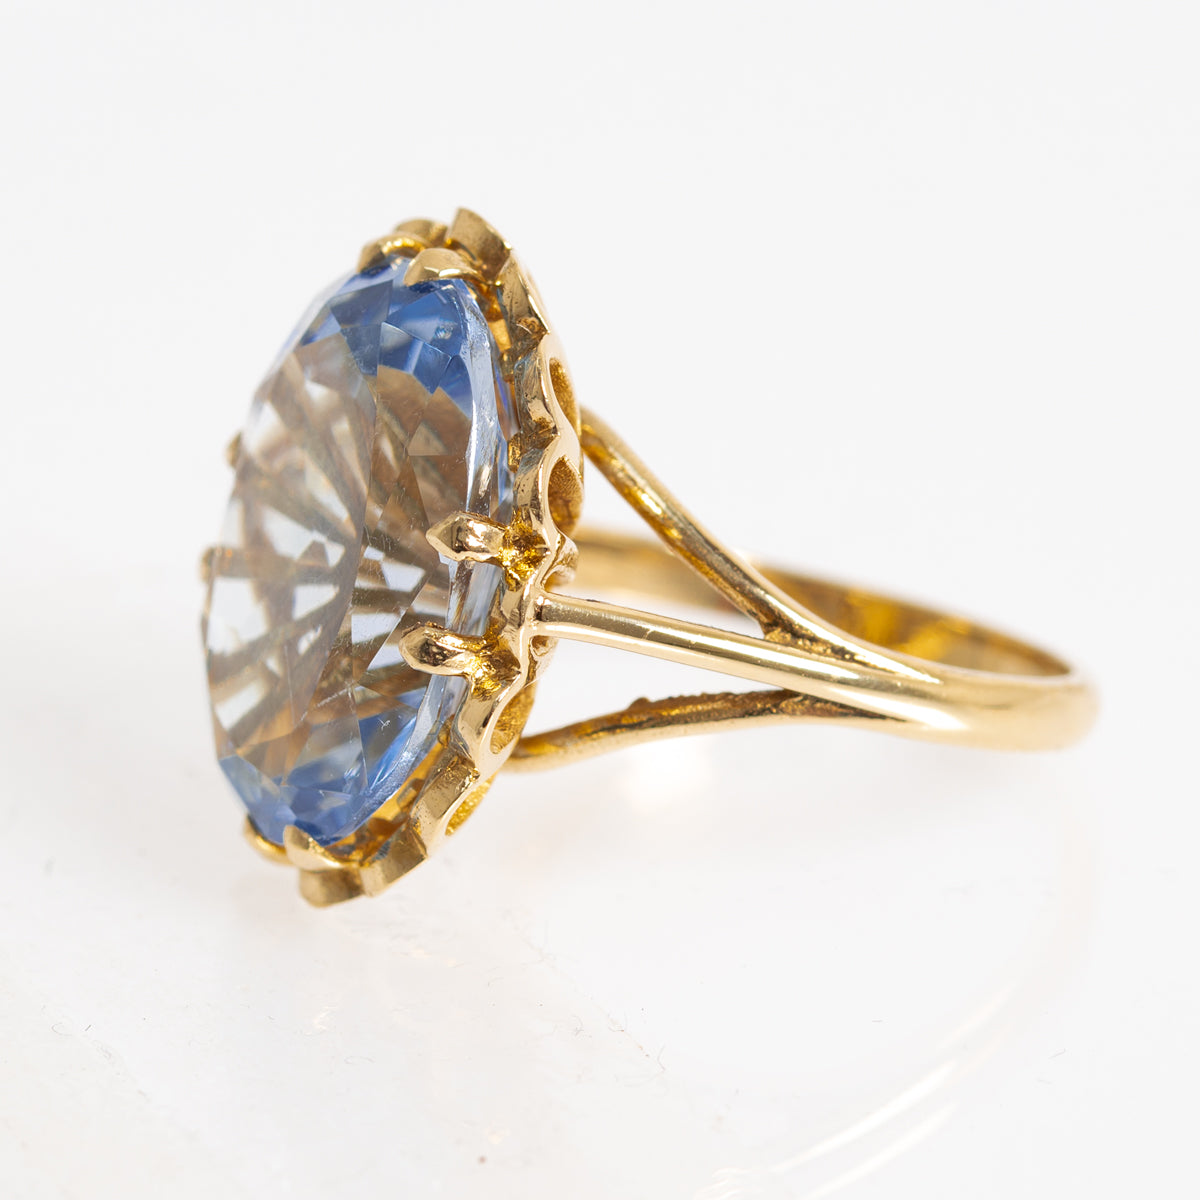 Vintage 9ct Gold & Very Large 8.4ct Sky Blue Topaz Dress Ring Ladies Size O1/2 (A1230)